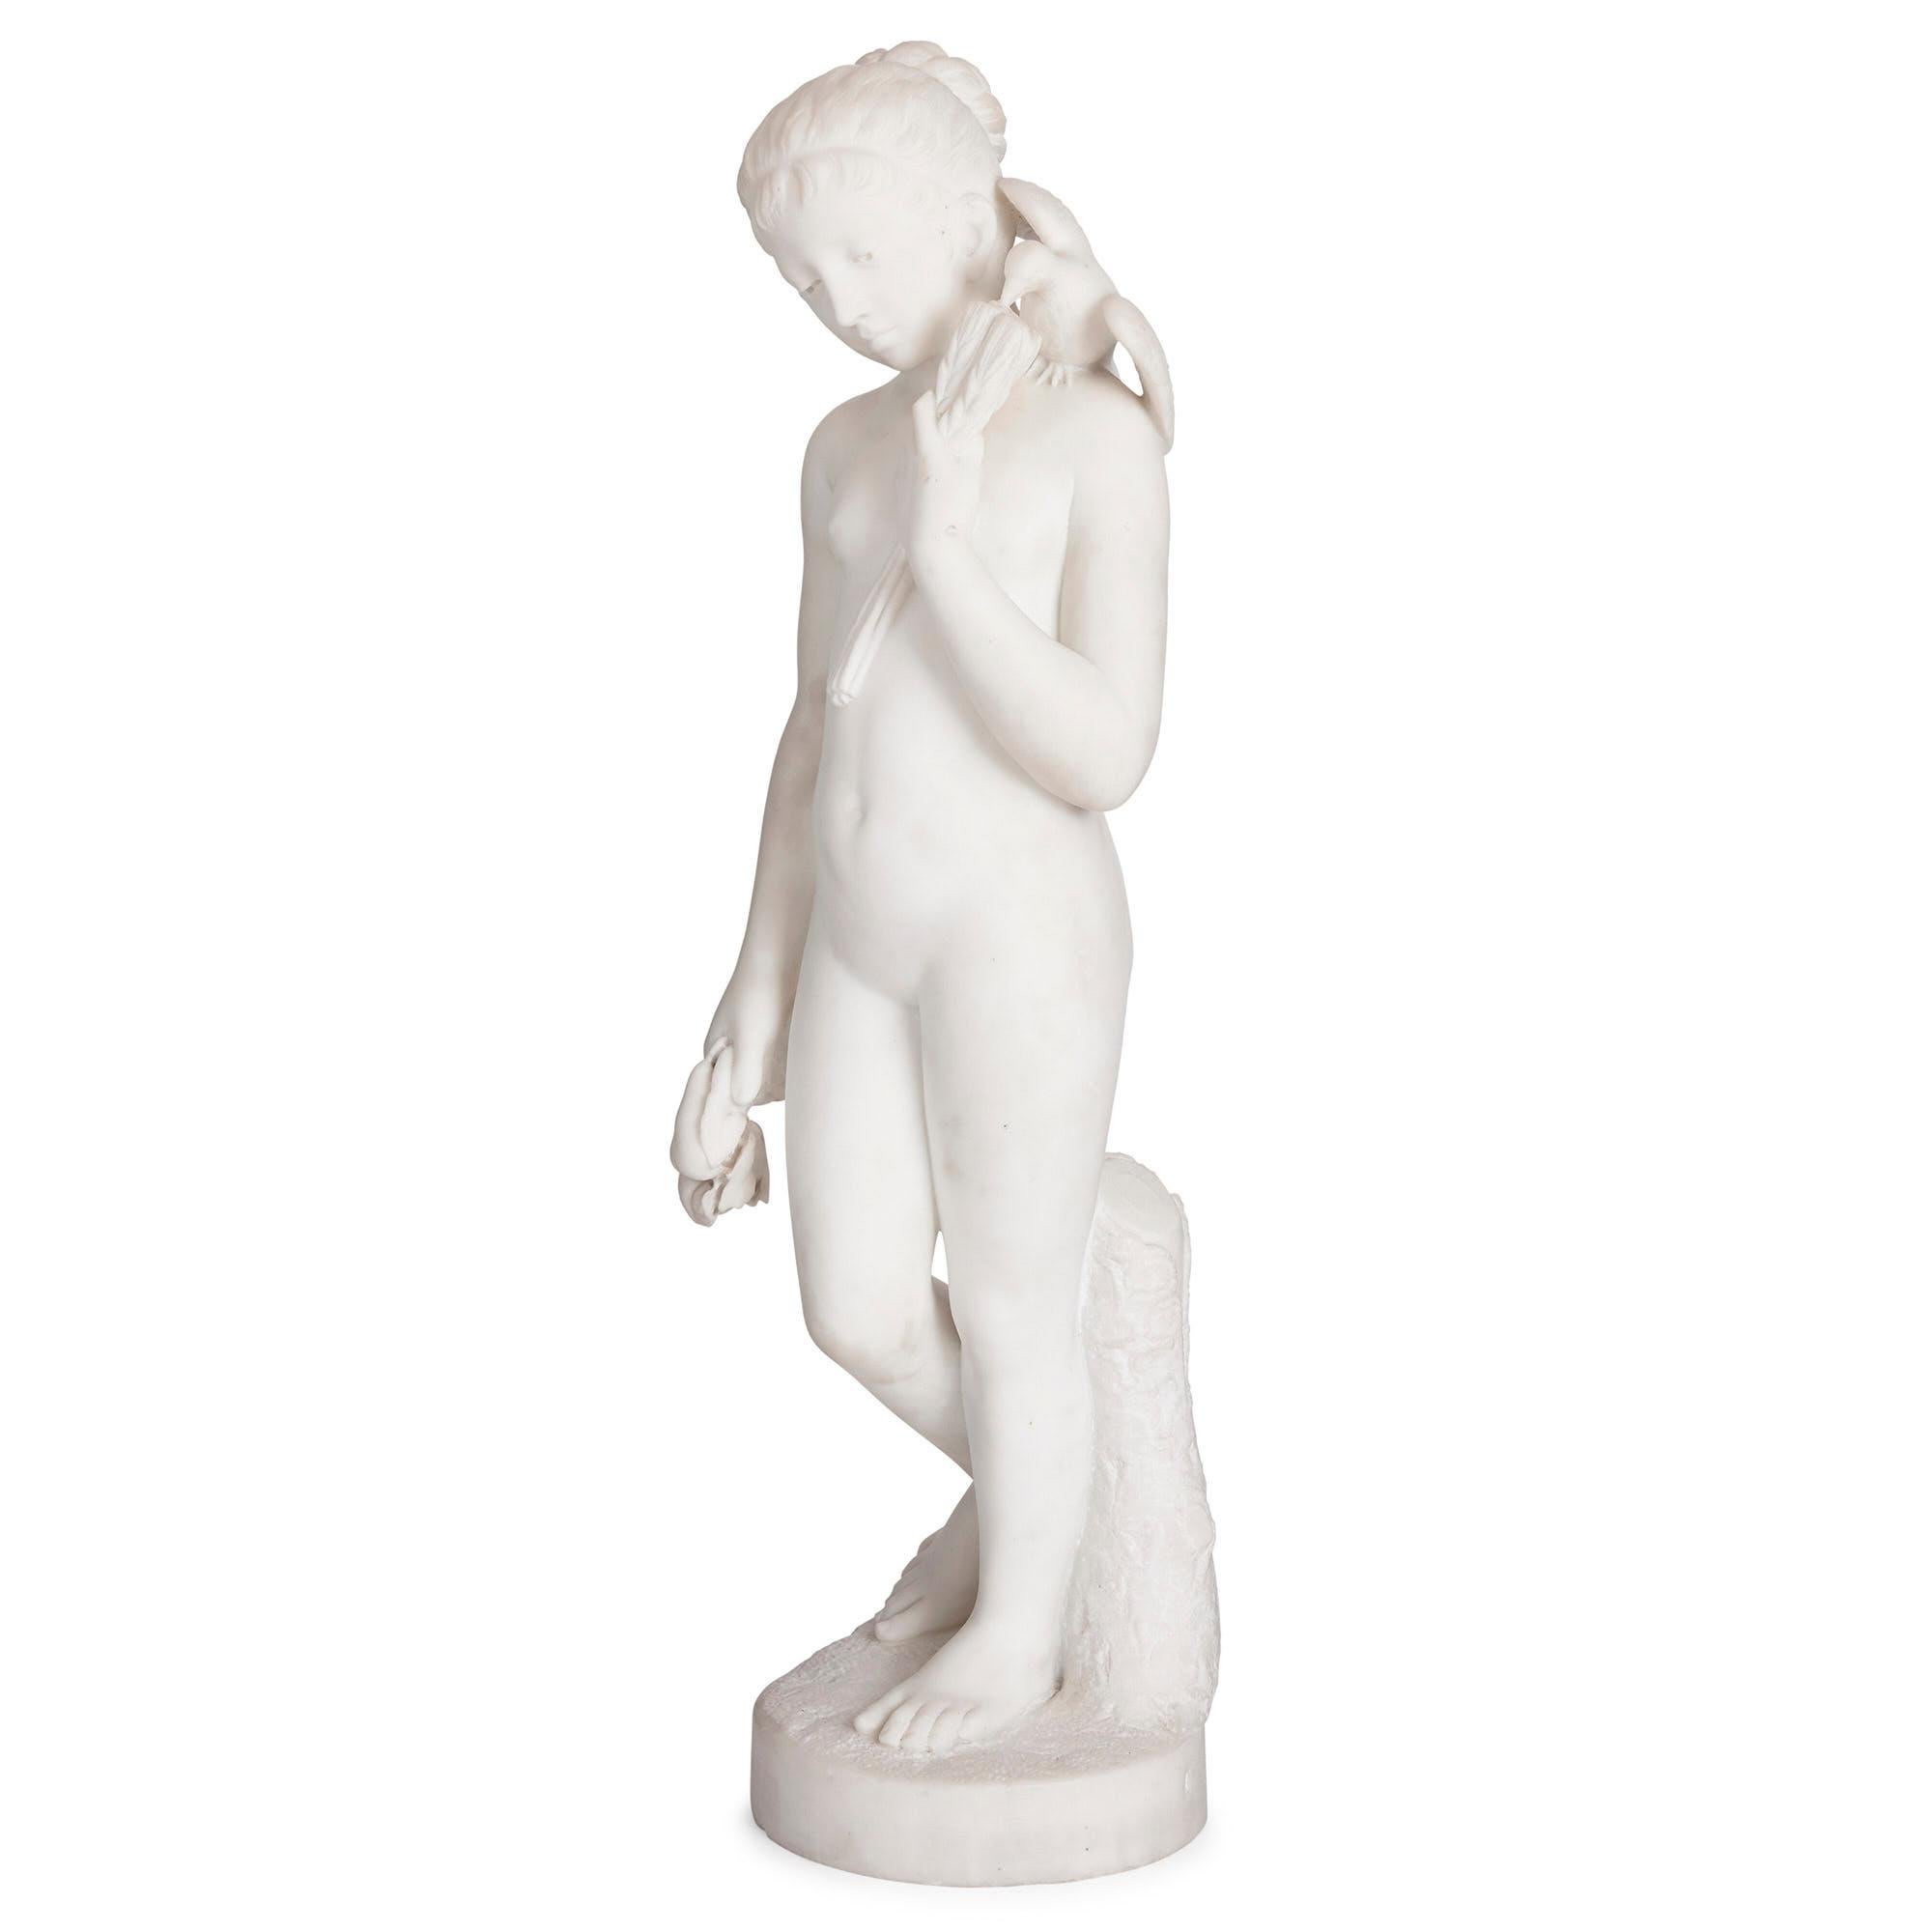 Antique sculpted marble figure of a young girl
Continental, late 19th century
Measures: Height 77cm, width 21cm, depth 20cm

This wonderful marble sculpture is a superb piece of late 19th century European decorative art. The sculpture portrays a